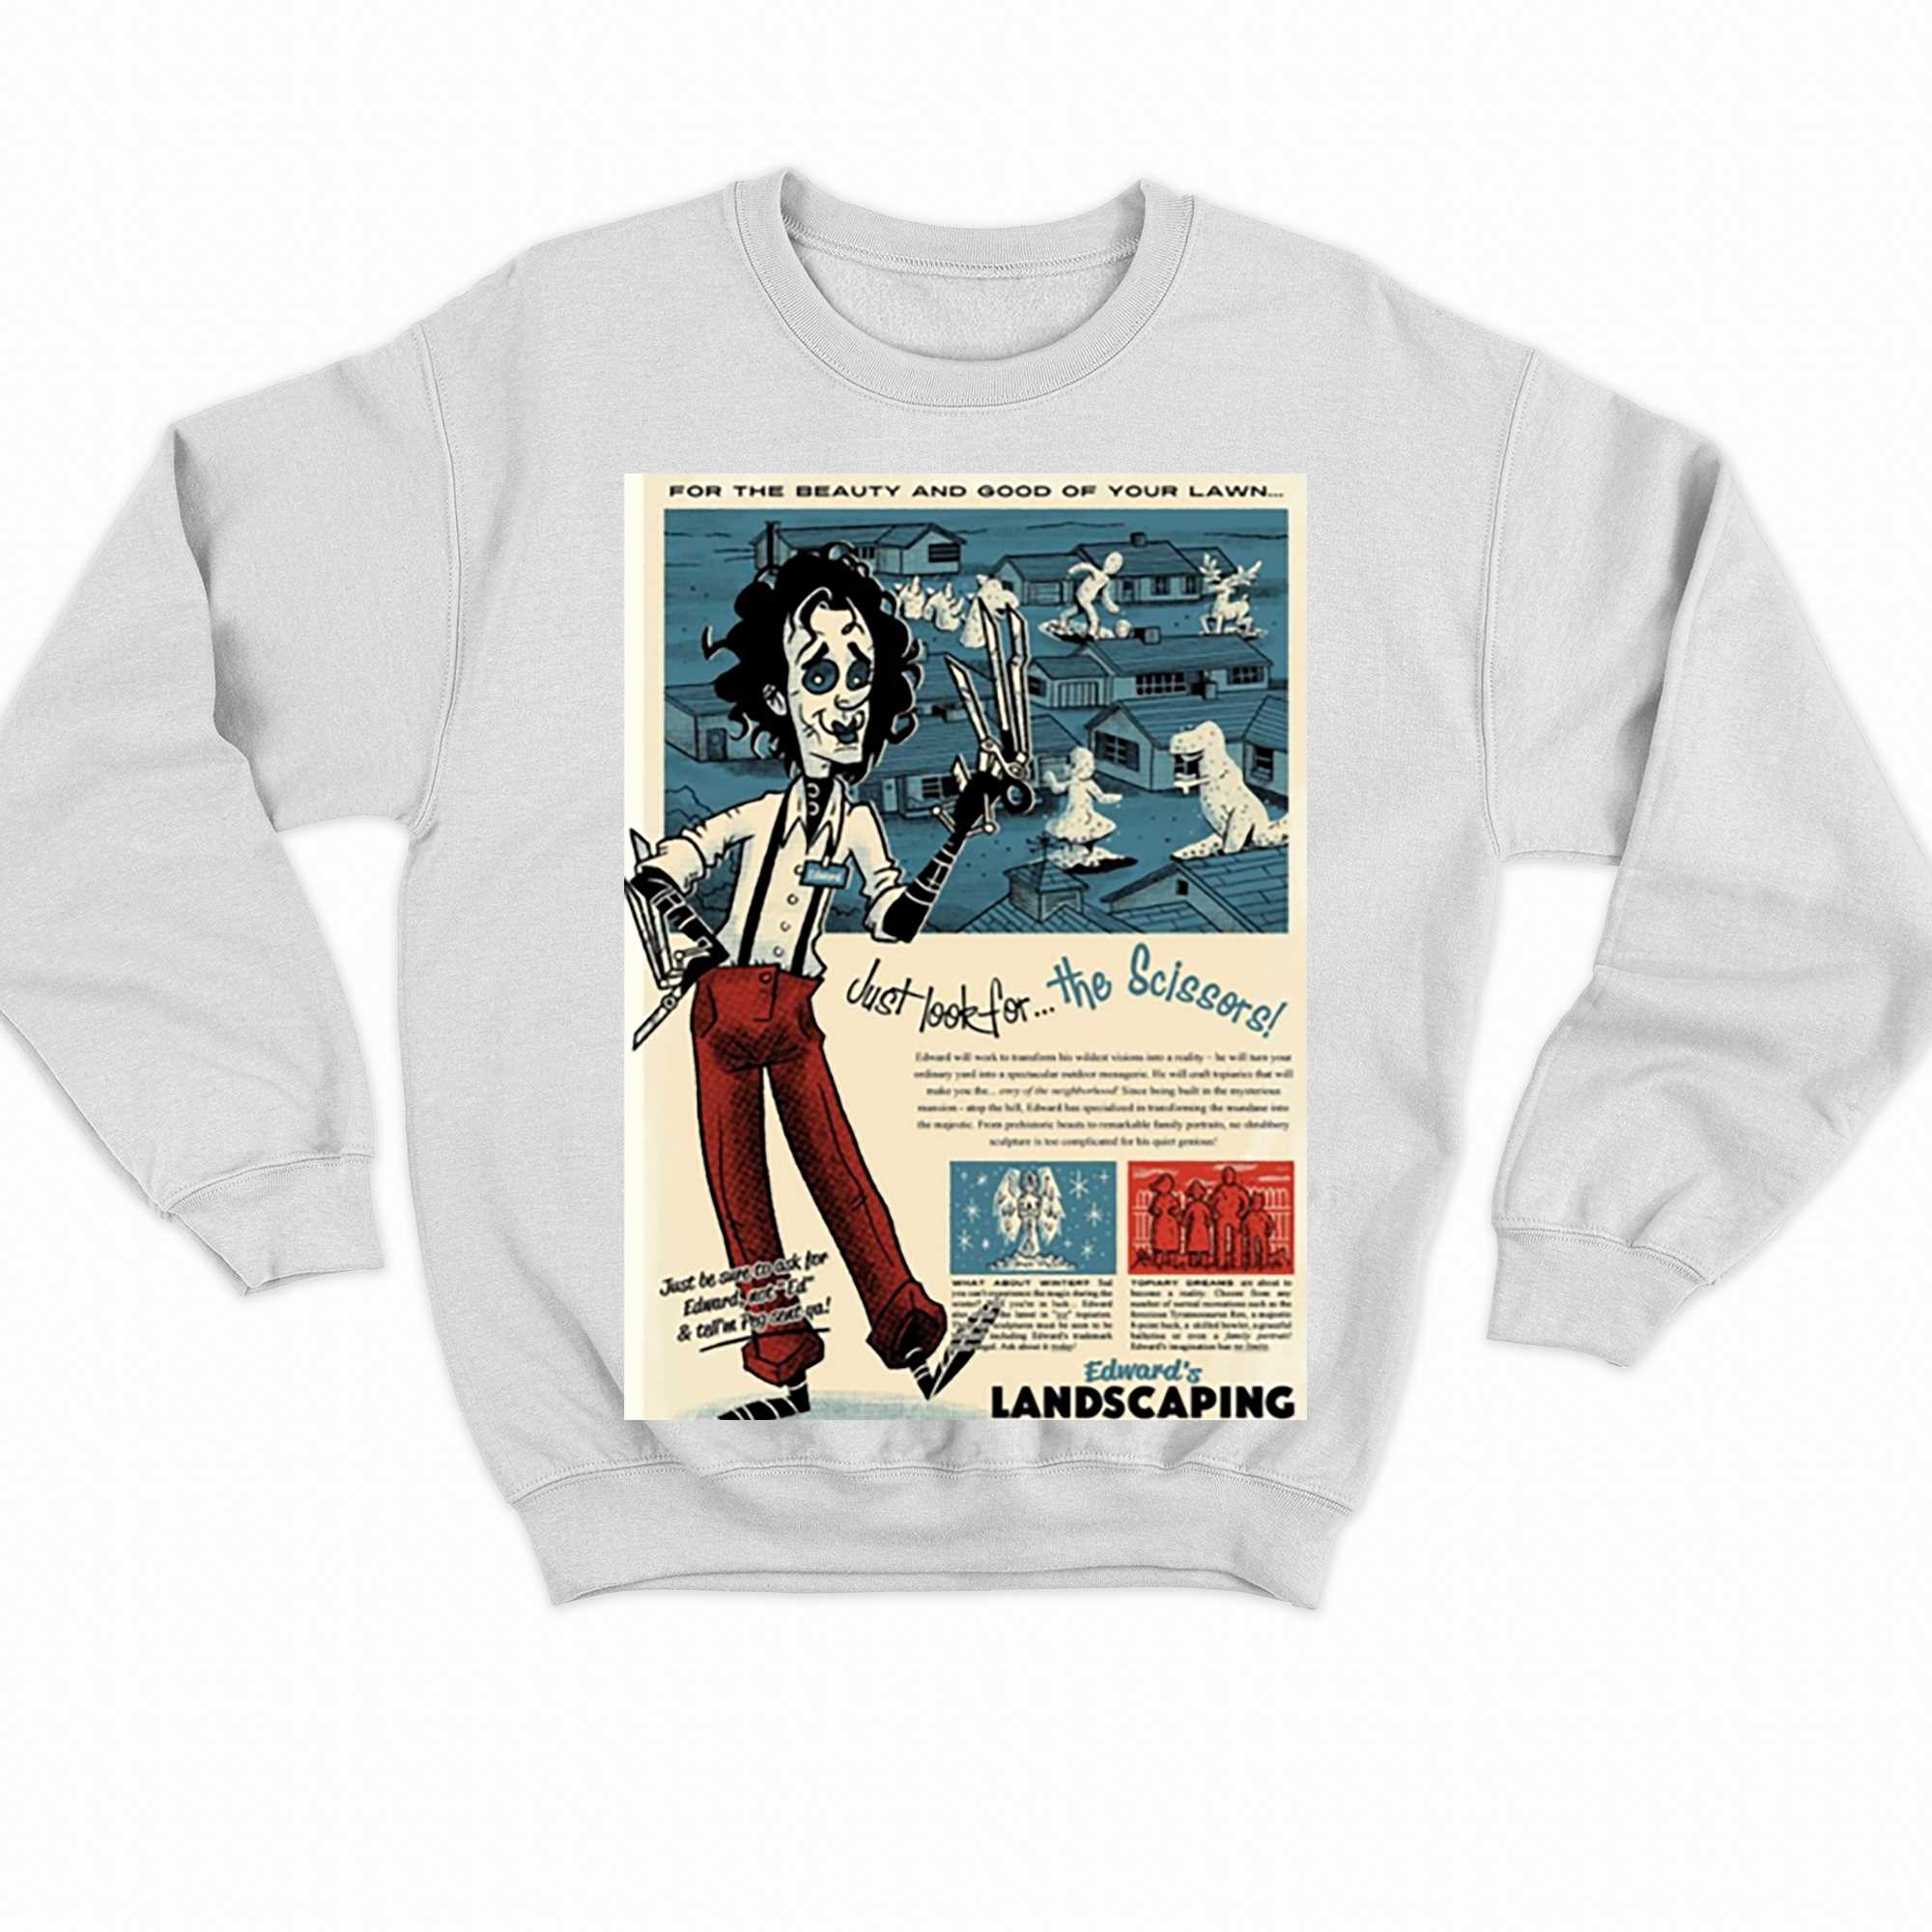 Edward Scissorhands 2023 Just Look For The Scissors Topiary And Lawn Care Shirt 